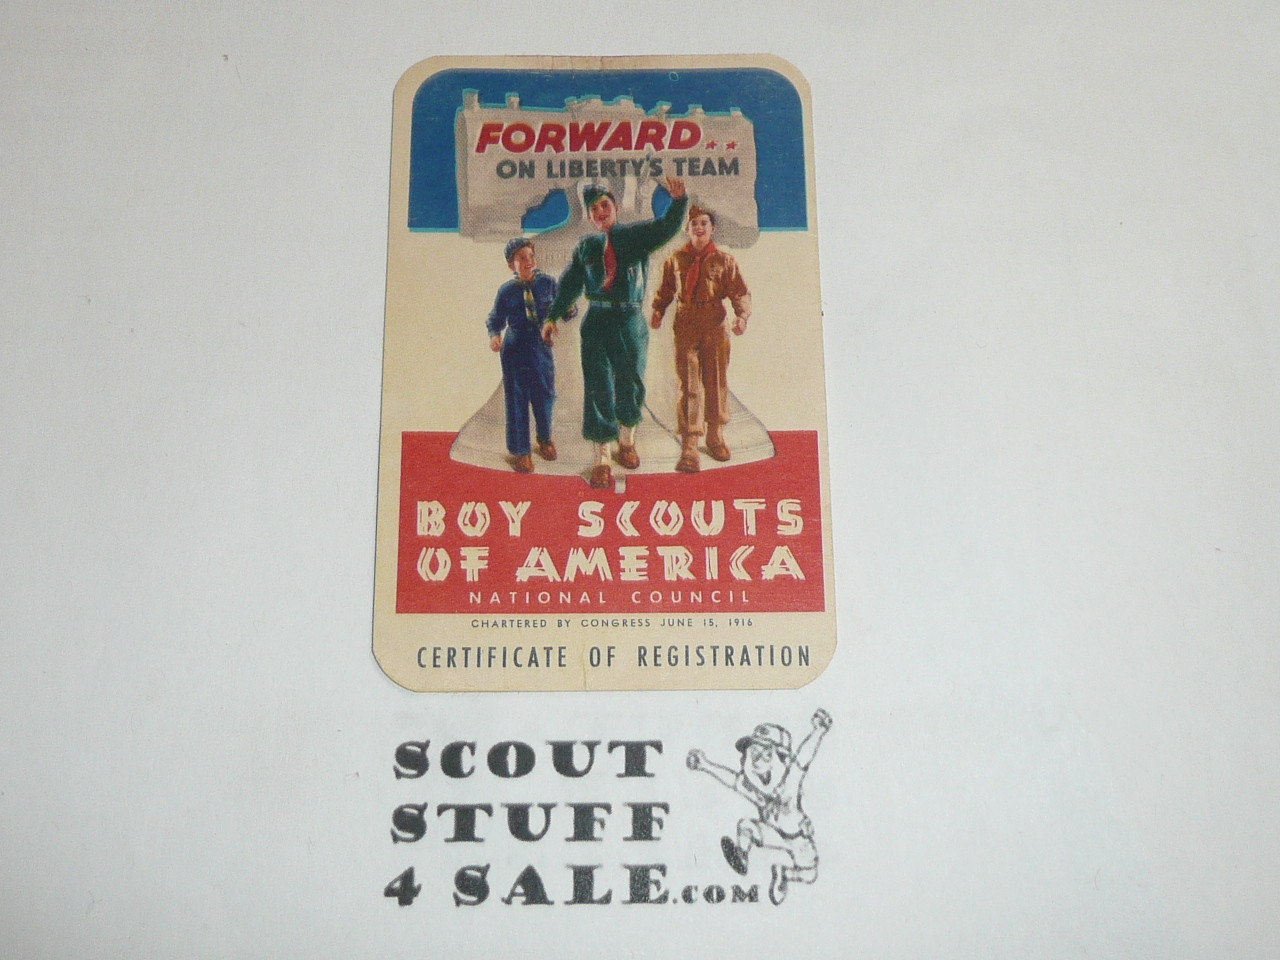 1955-1956 Boy Scout Membership Card, 2 signatures, buyer to receive a card expiring ranging from 1955-1956 of this style, BSMC69